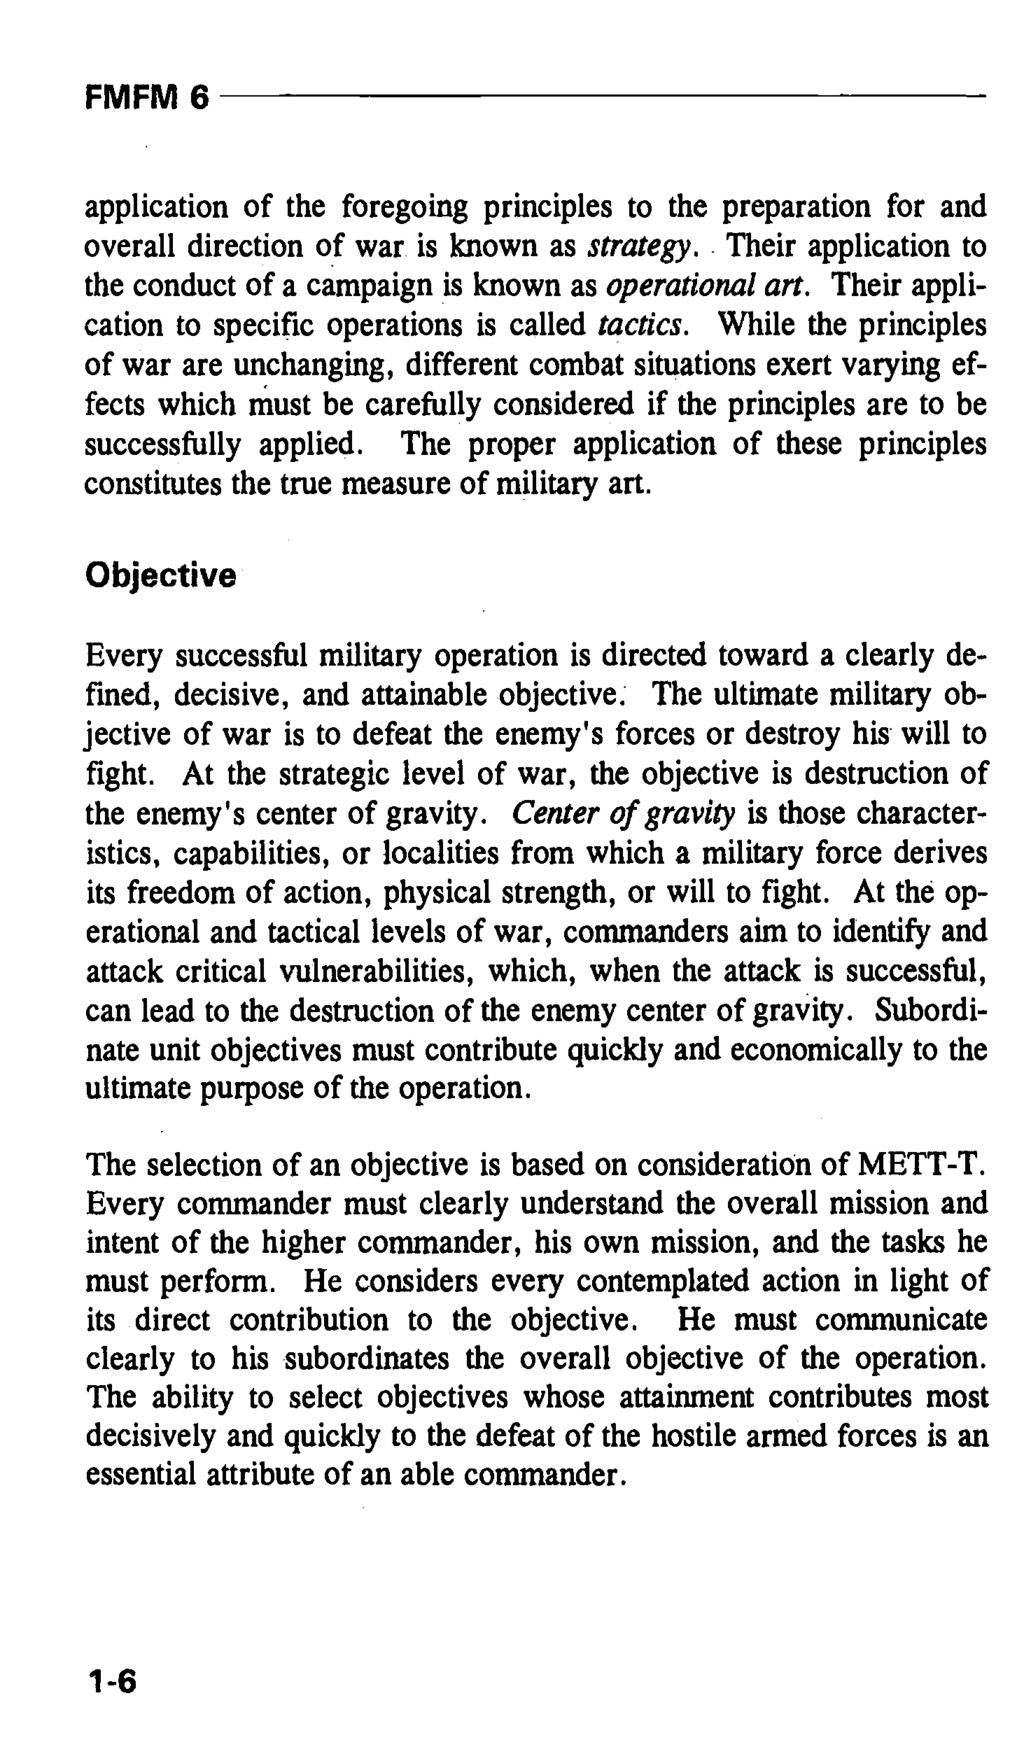 application of the foregoing principles to the preparation for and overall direction of war is known as strategy. Their application to the conduct of a campaign is known as operational art.